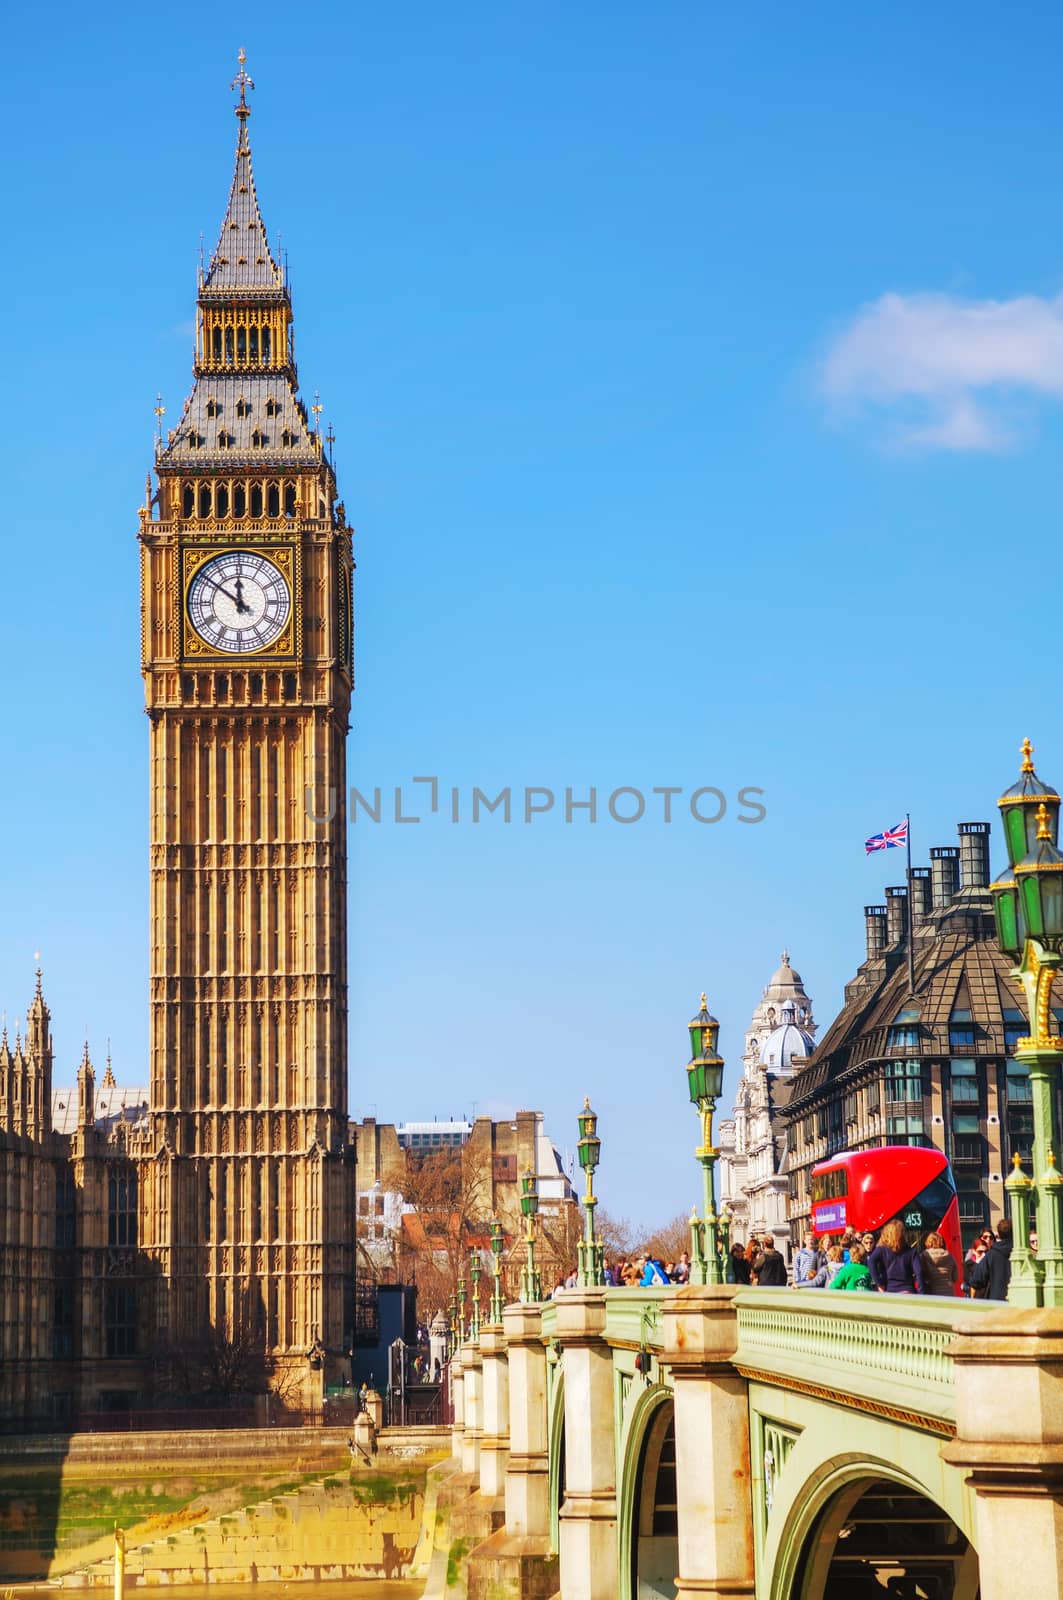 London with the Elizabeth Tower and Houses of Parliament by AndreyKr